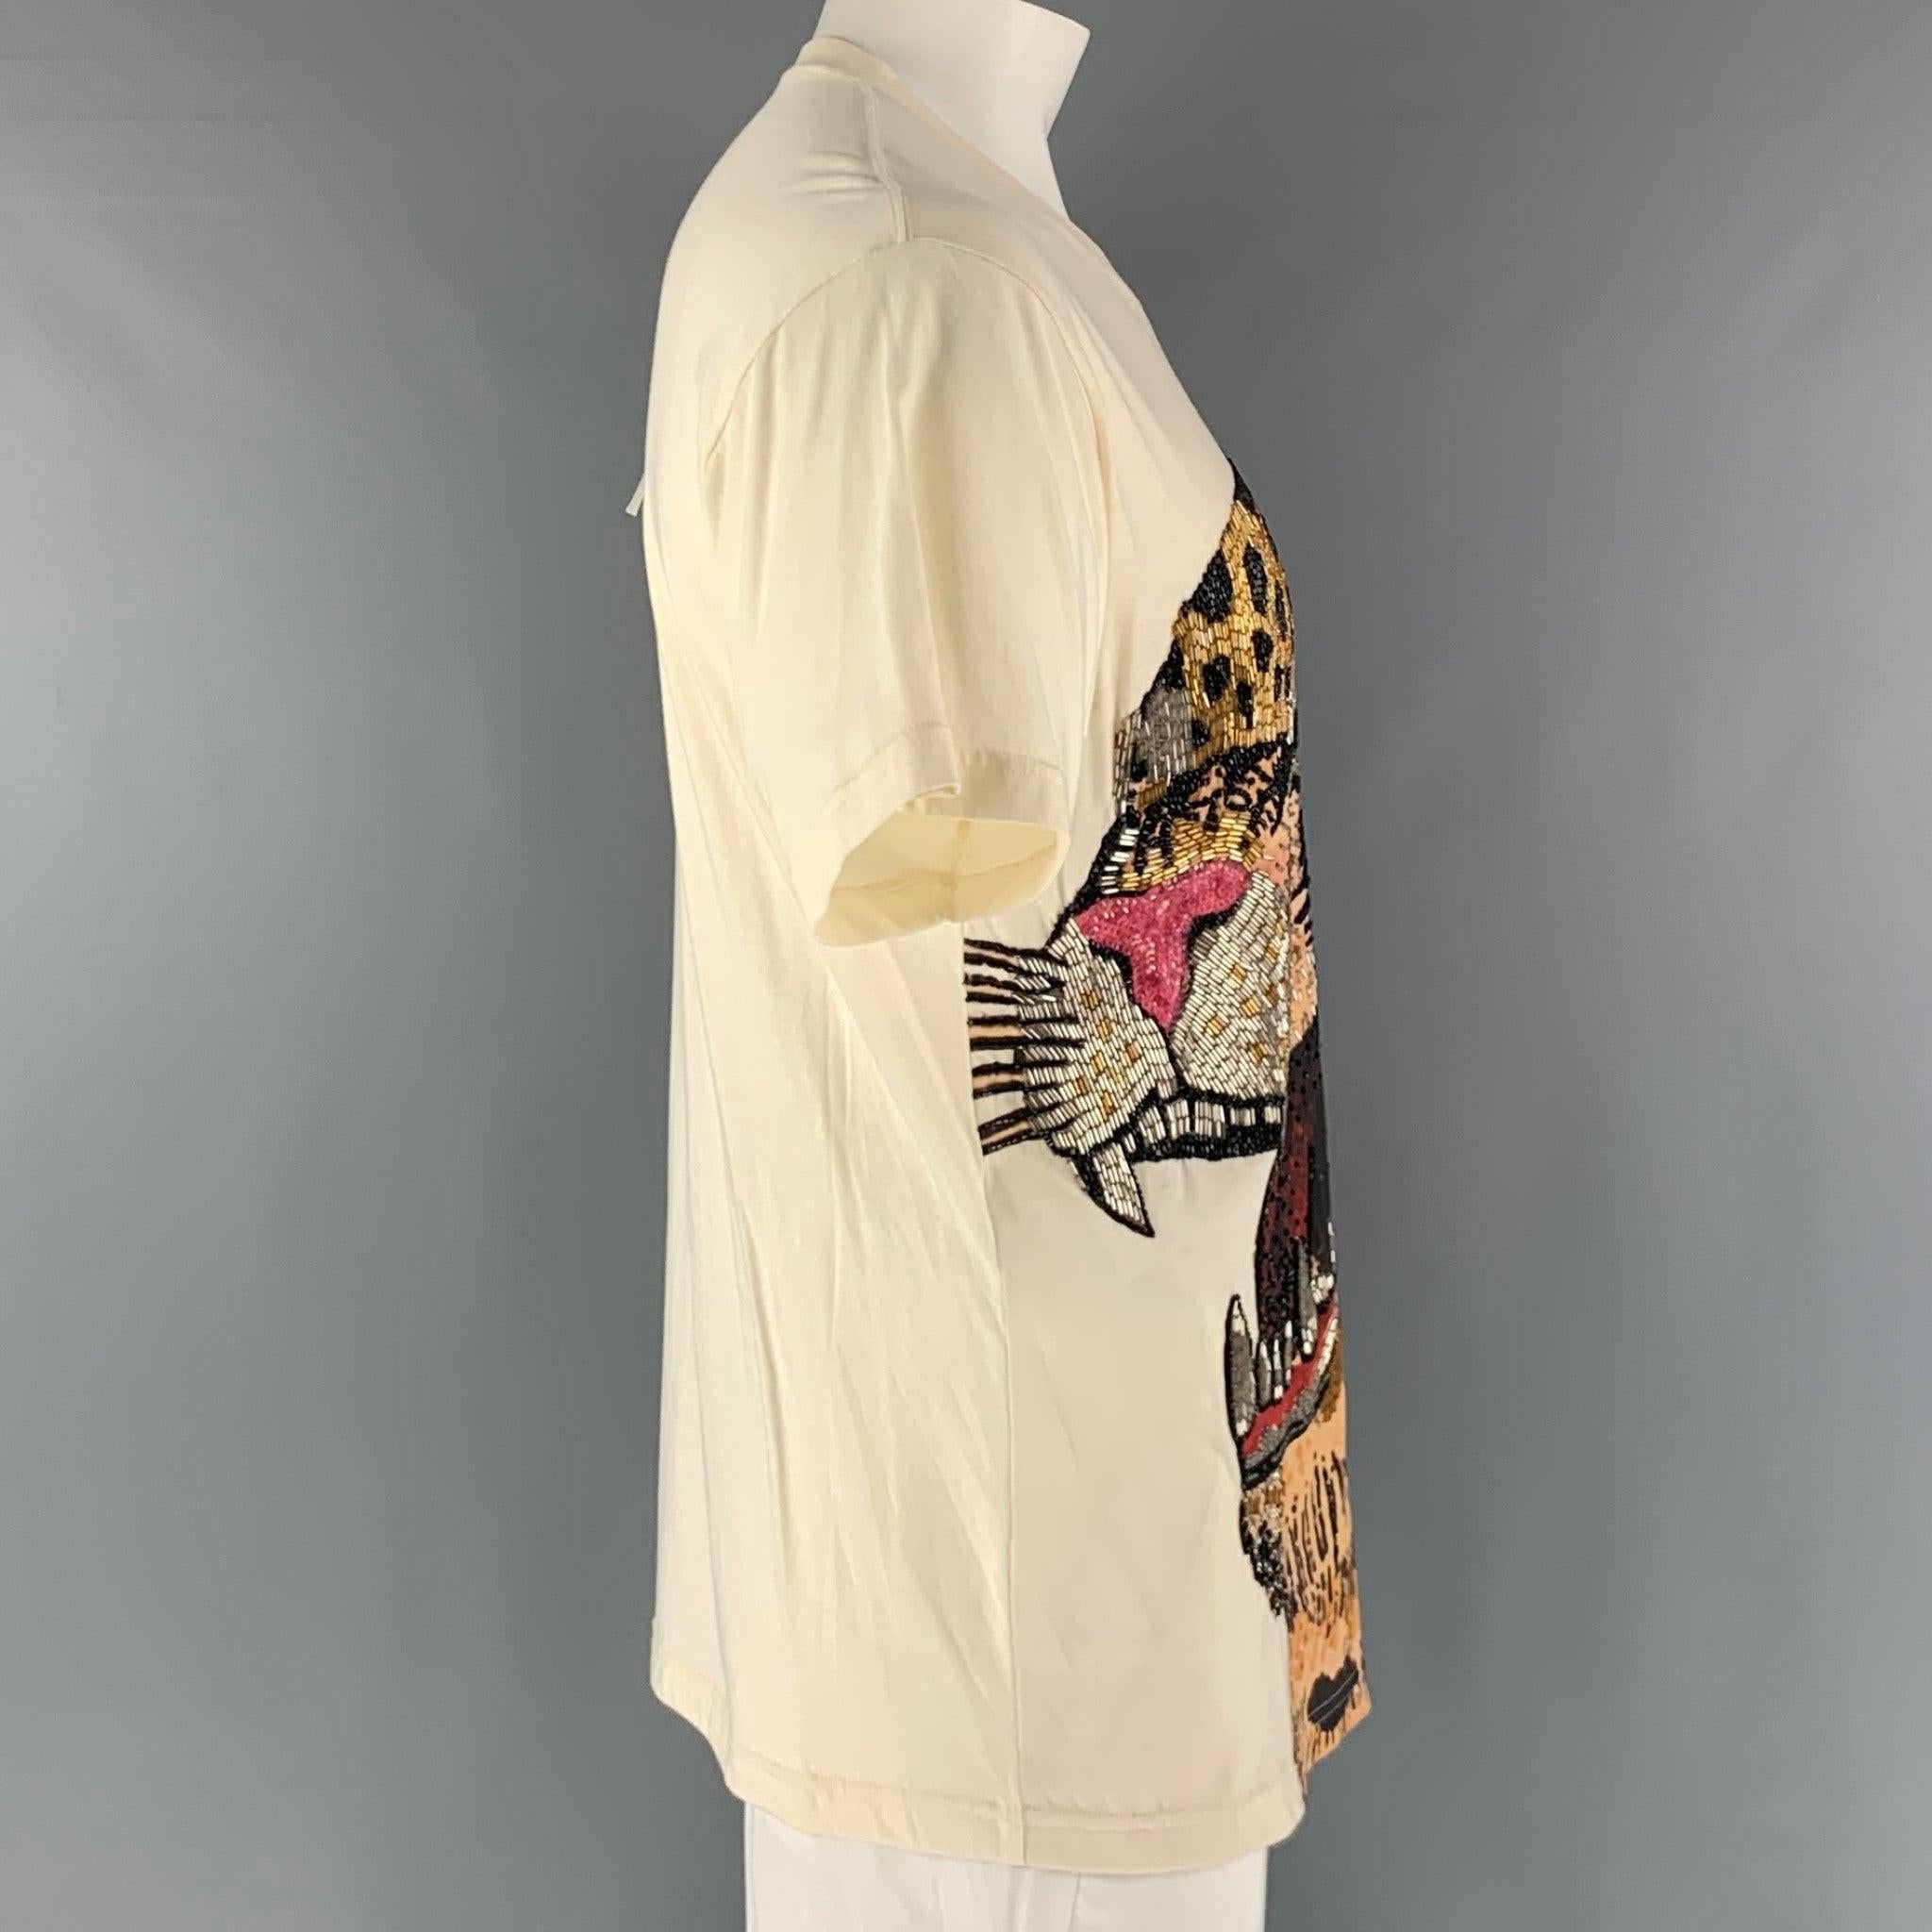 GUCCI F/W 2019 oversized t-shirt comes in a beige jersey cotton knit material featuring a feline print with bead and sequin embroidery design at front and a crew-neck. Made in Italy.New with Tags. 

Marked:   XS 

Measurements: 
 
Shoulder: 22